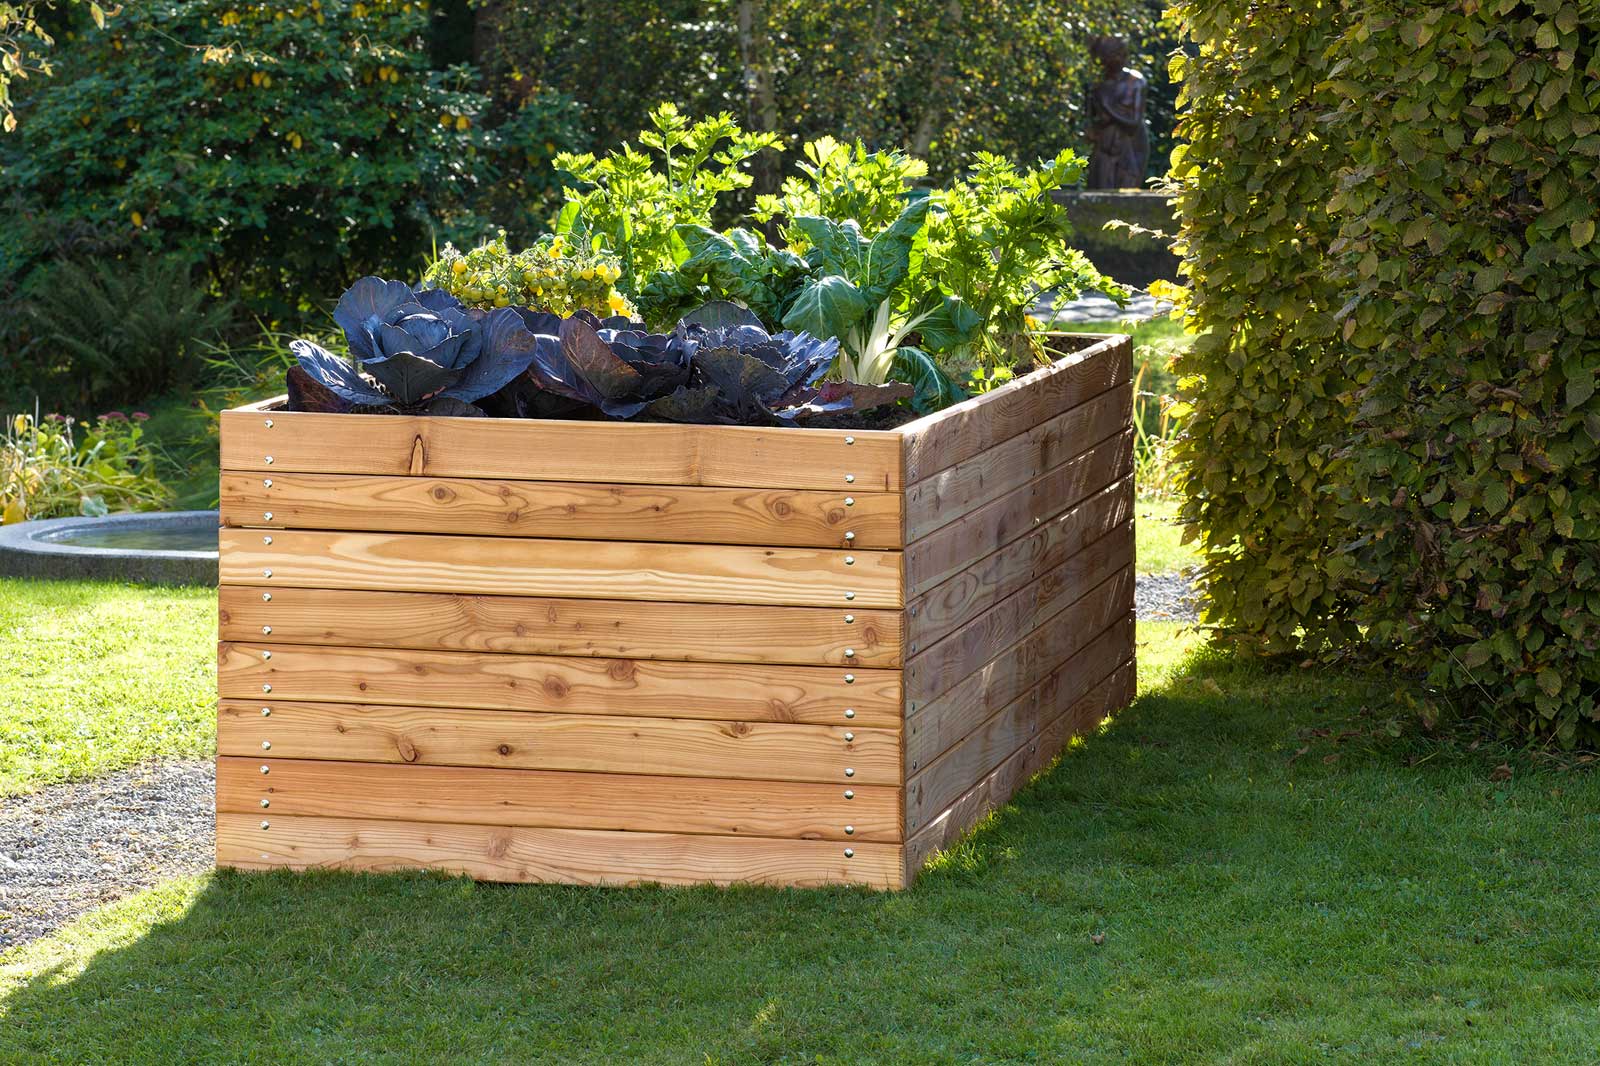 Raised beds by Sager for terrace or balcony, Swiss Made